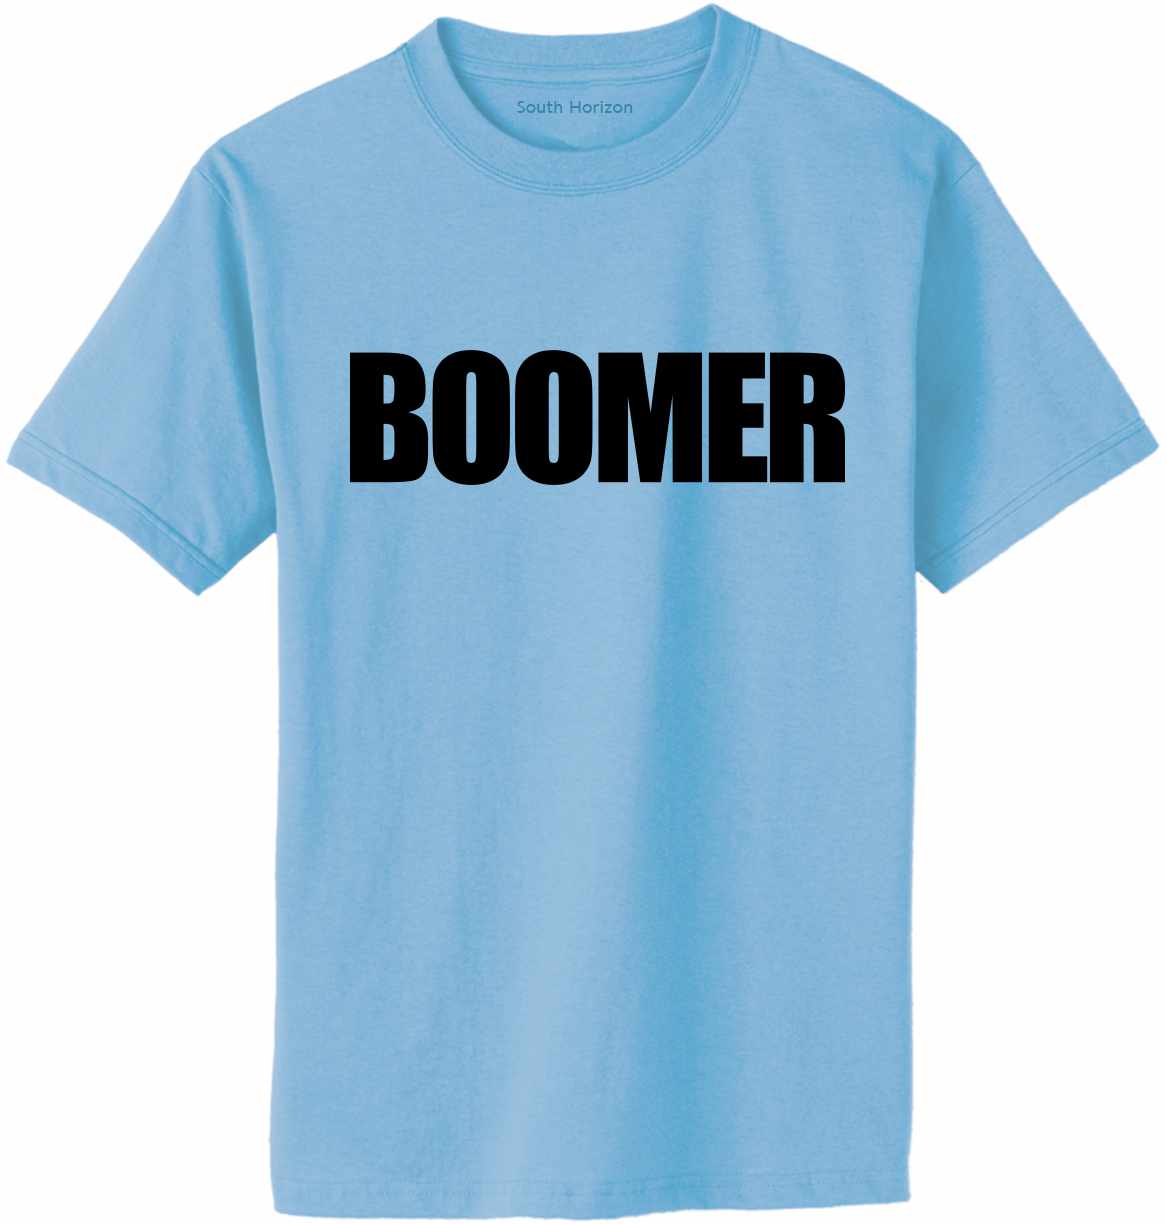 BOOMER on Adult T-Shirt (#1239-1)